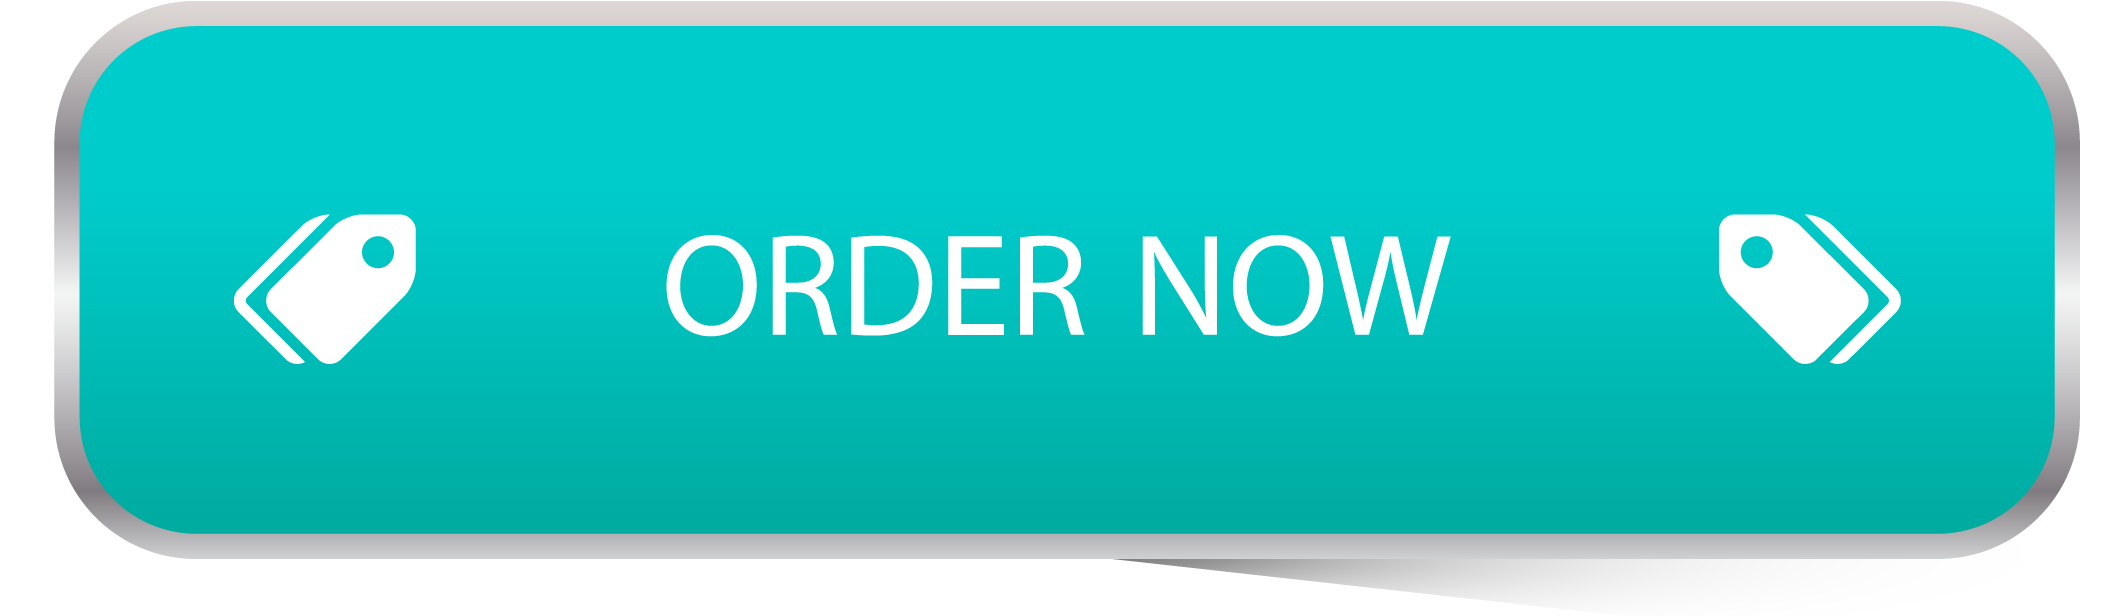 Order Now Button Teal Background PNG